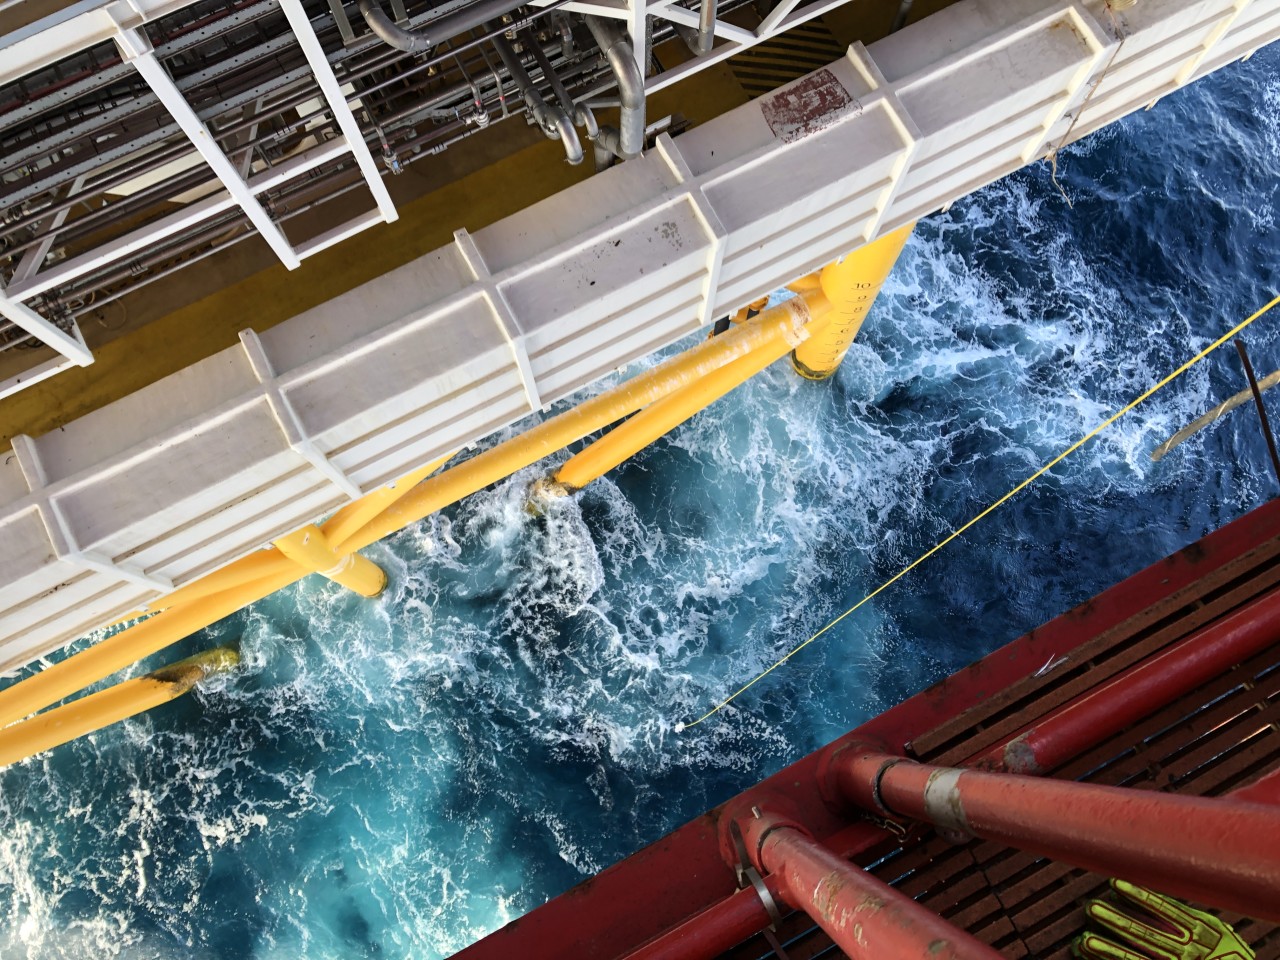 Underwater ROV inspections on offshore platforms